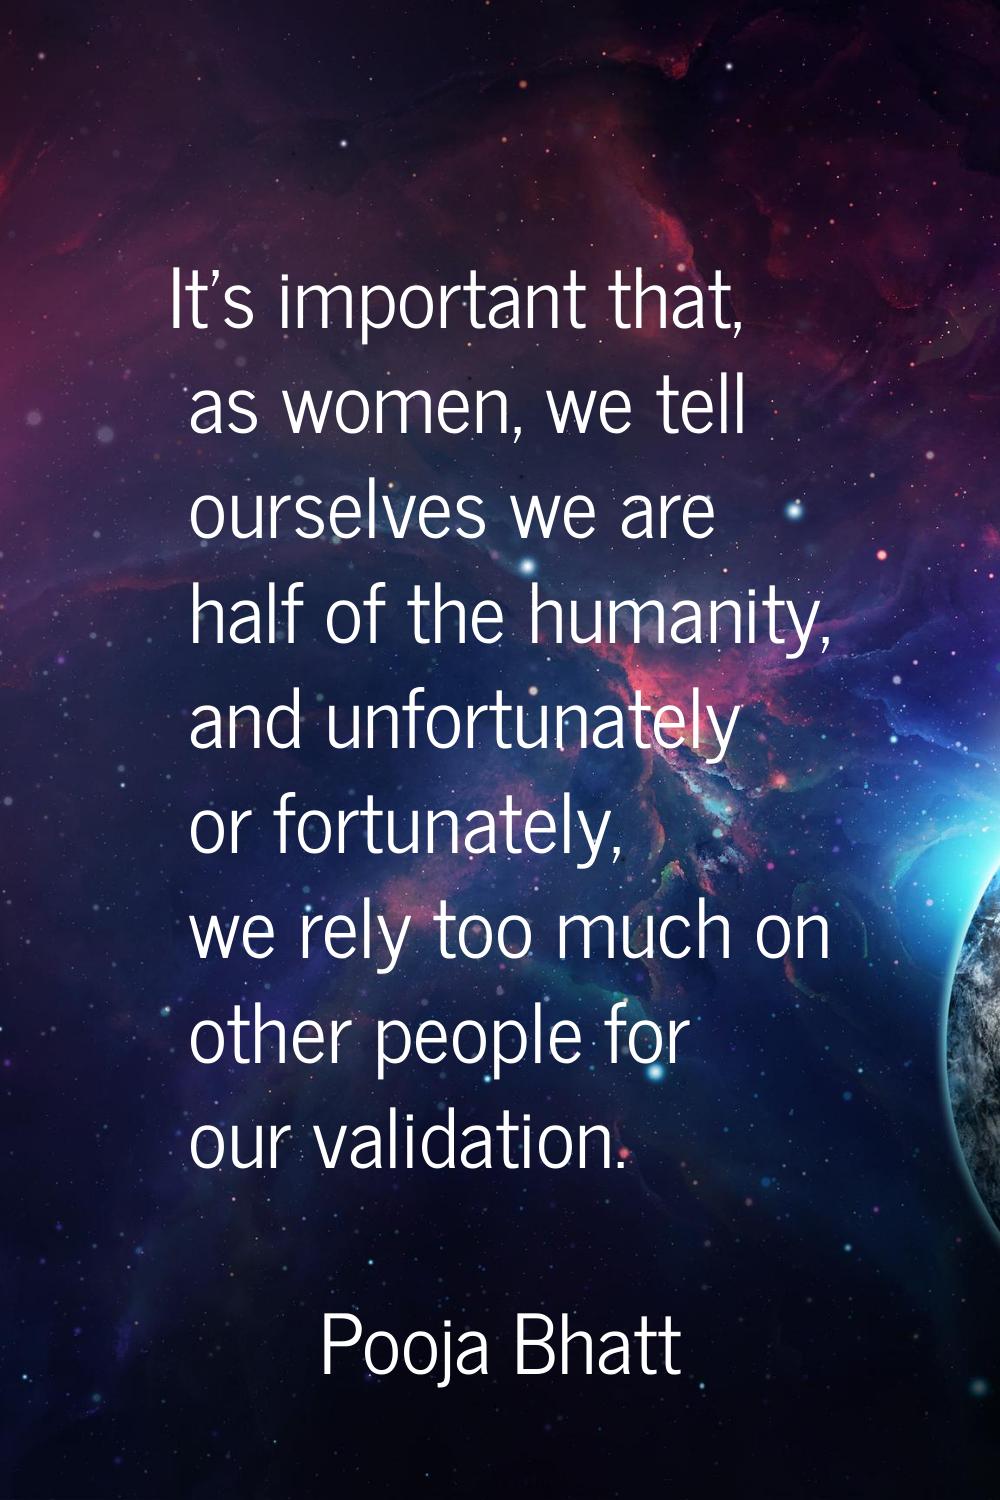 It's important that, as women, we tell ourselves we are half of the humanity, and unfortunately or 